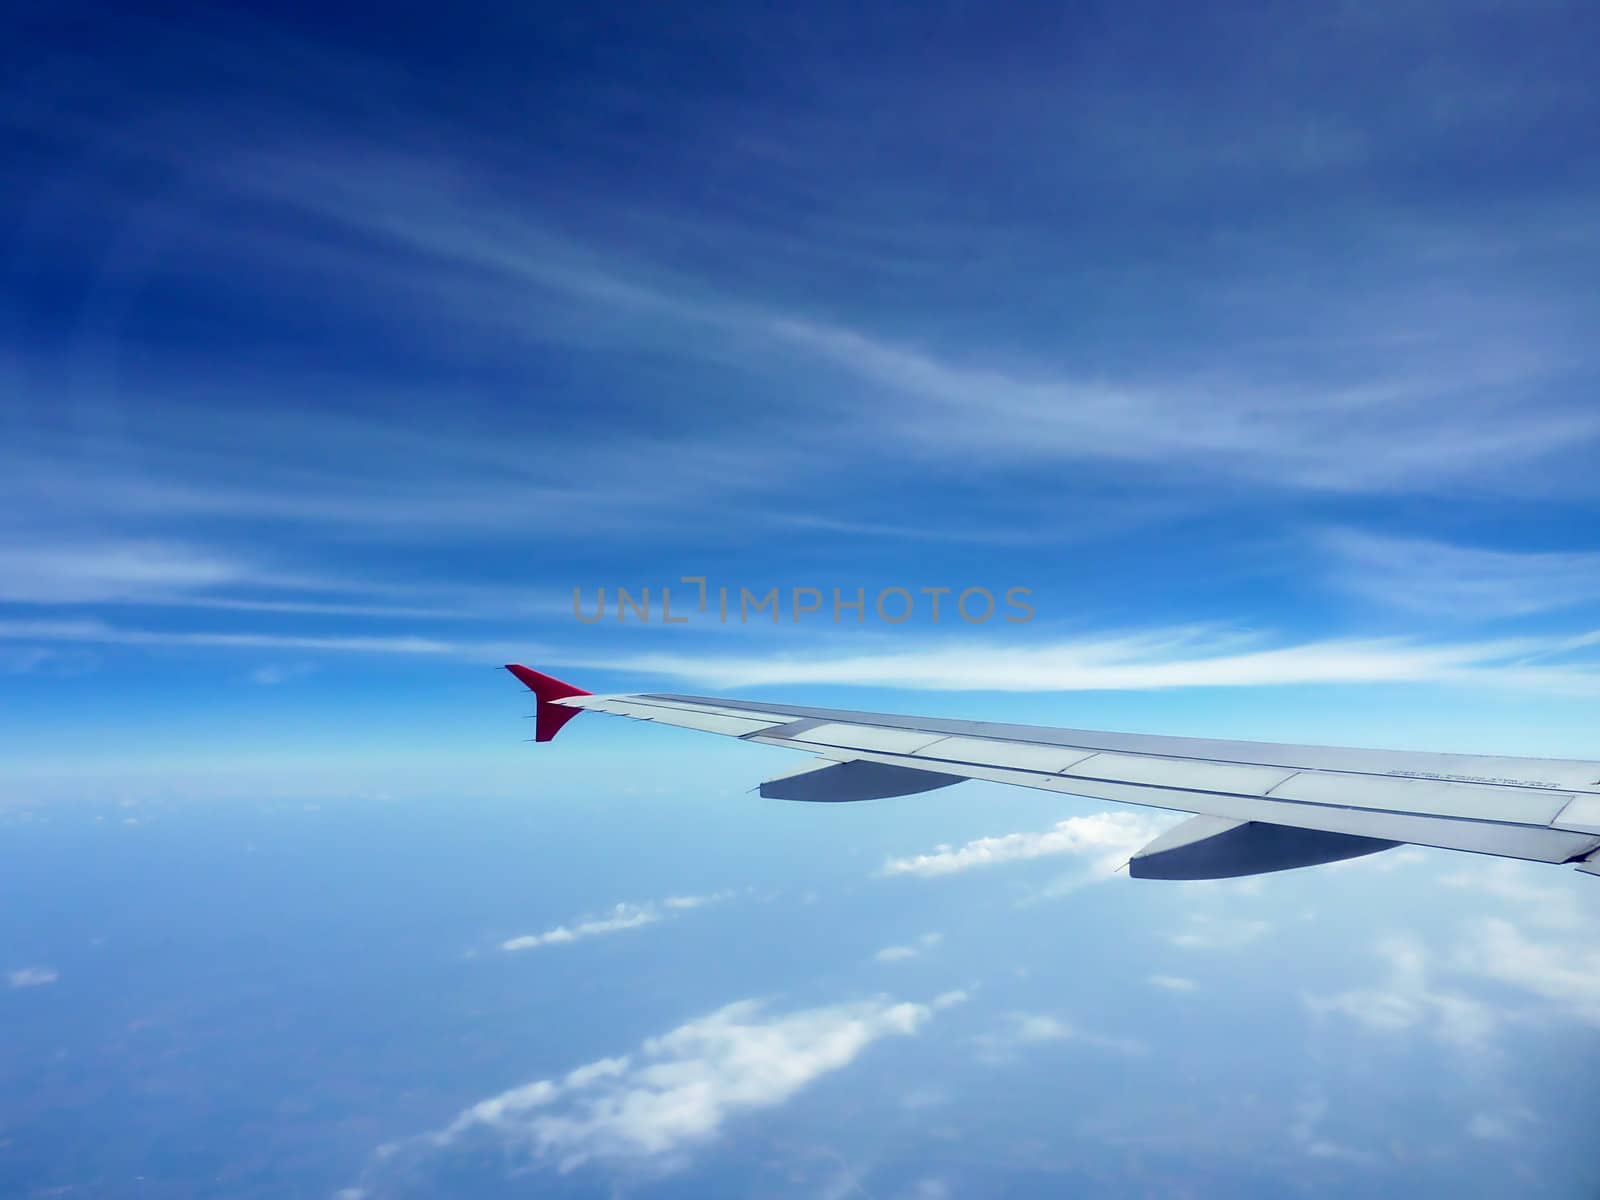 Red and grey wing of a plane flying in a beautiful cloudy blue sky